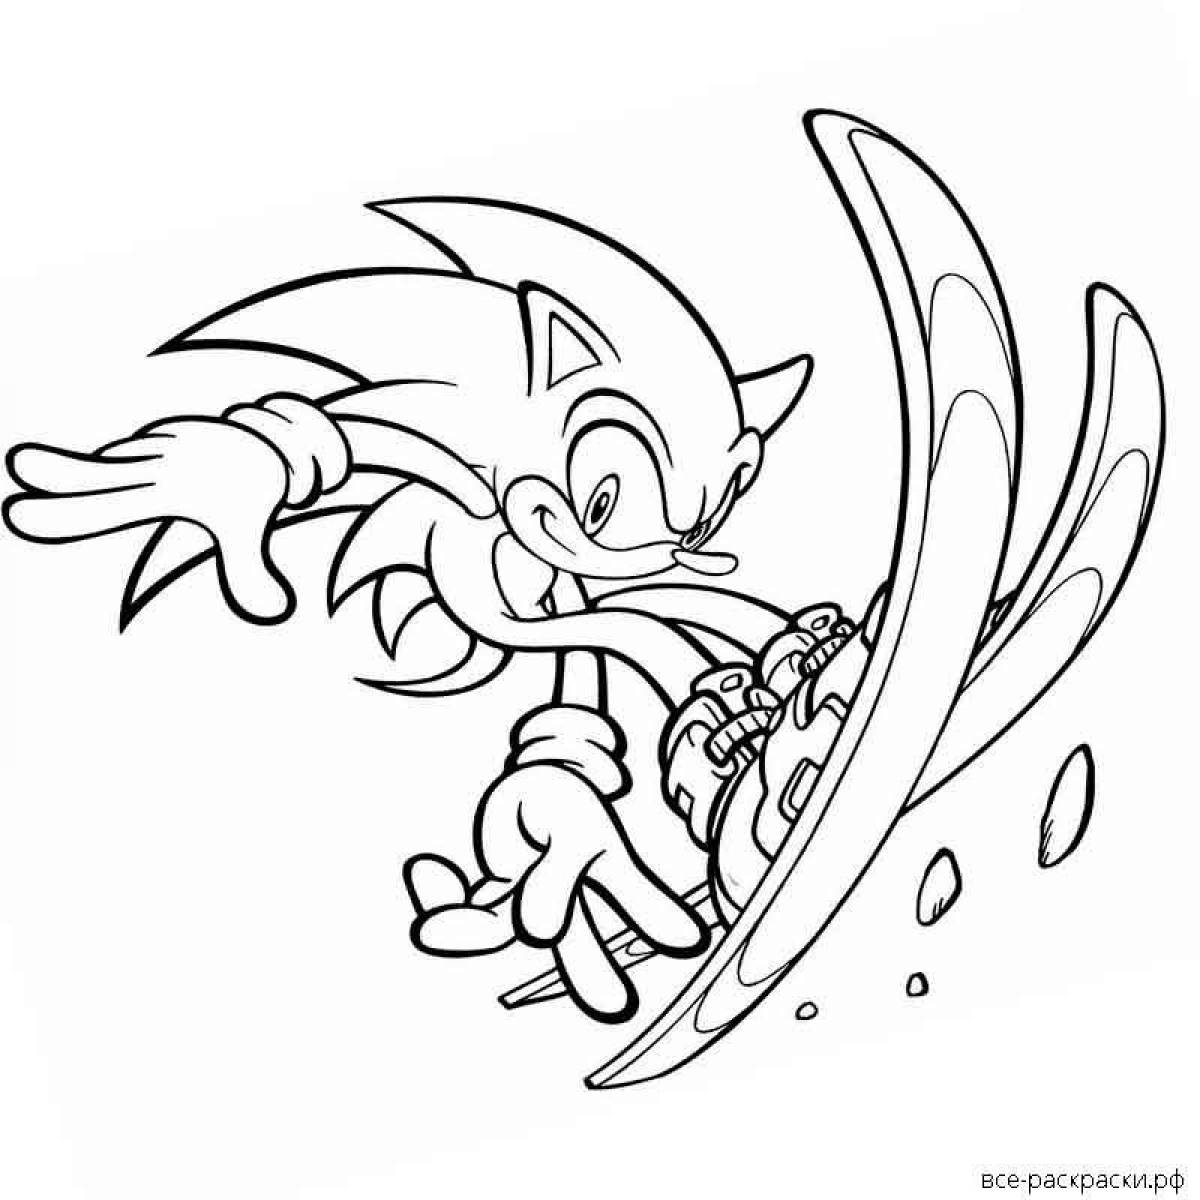 Attractive sonic coloring in the movies